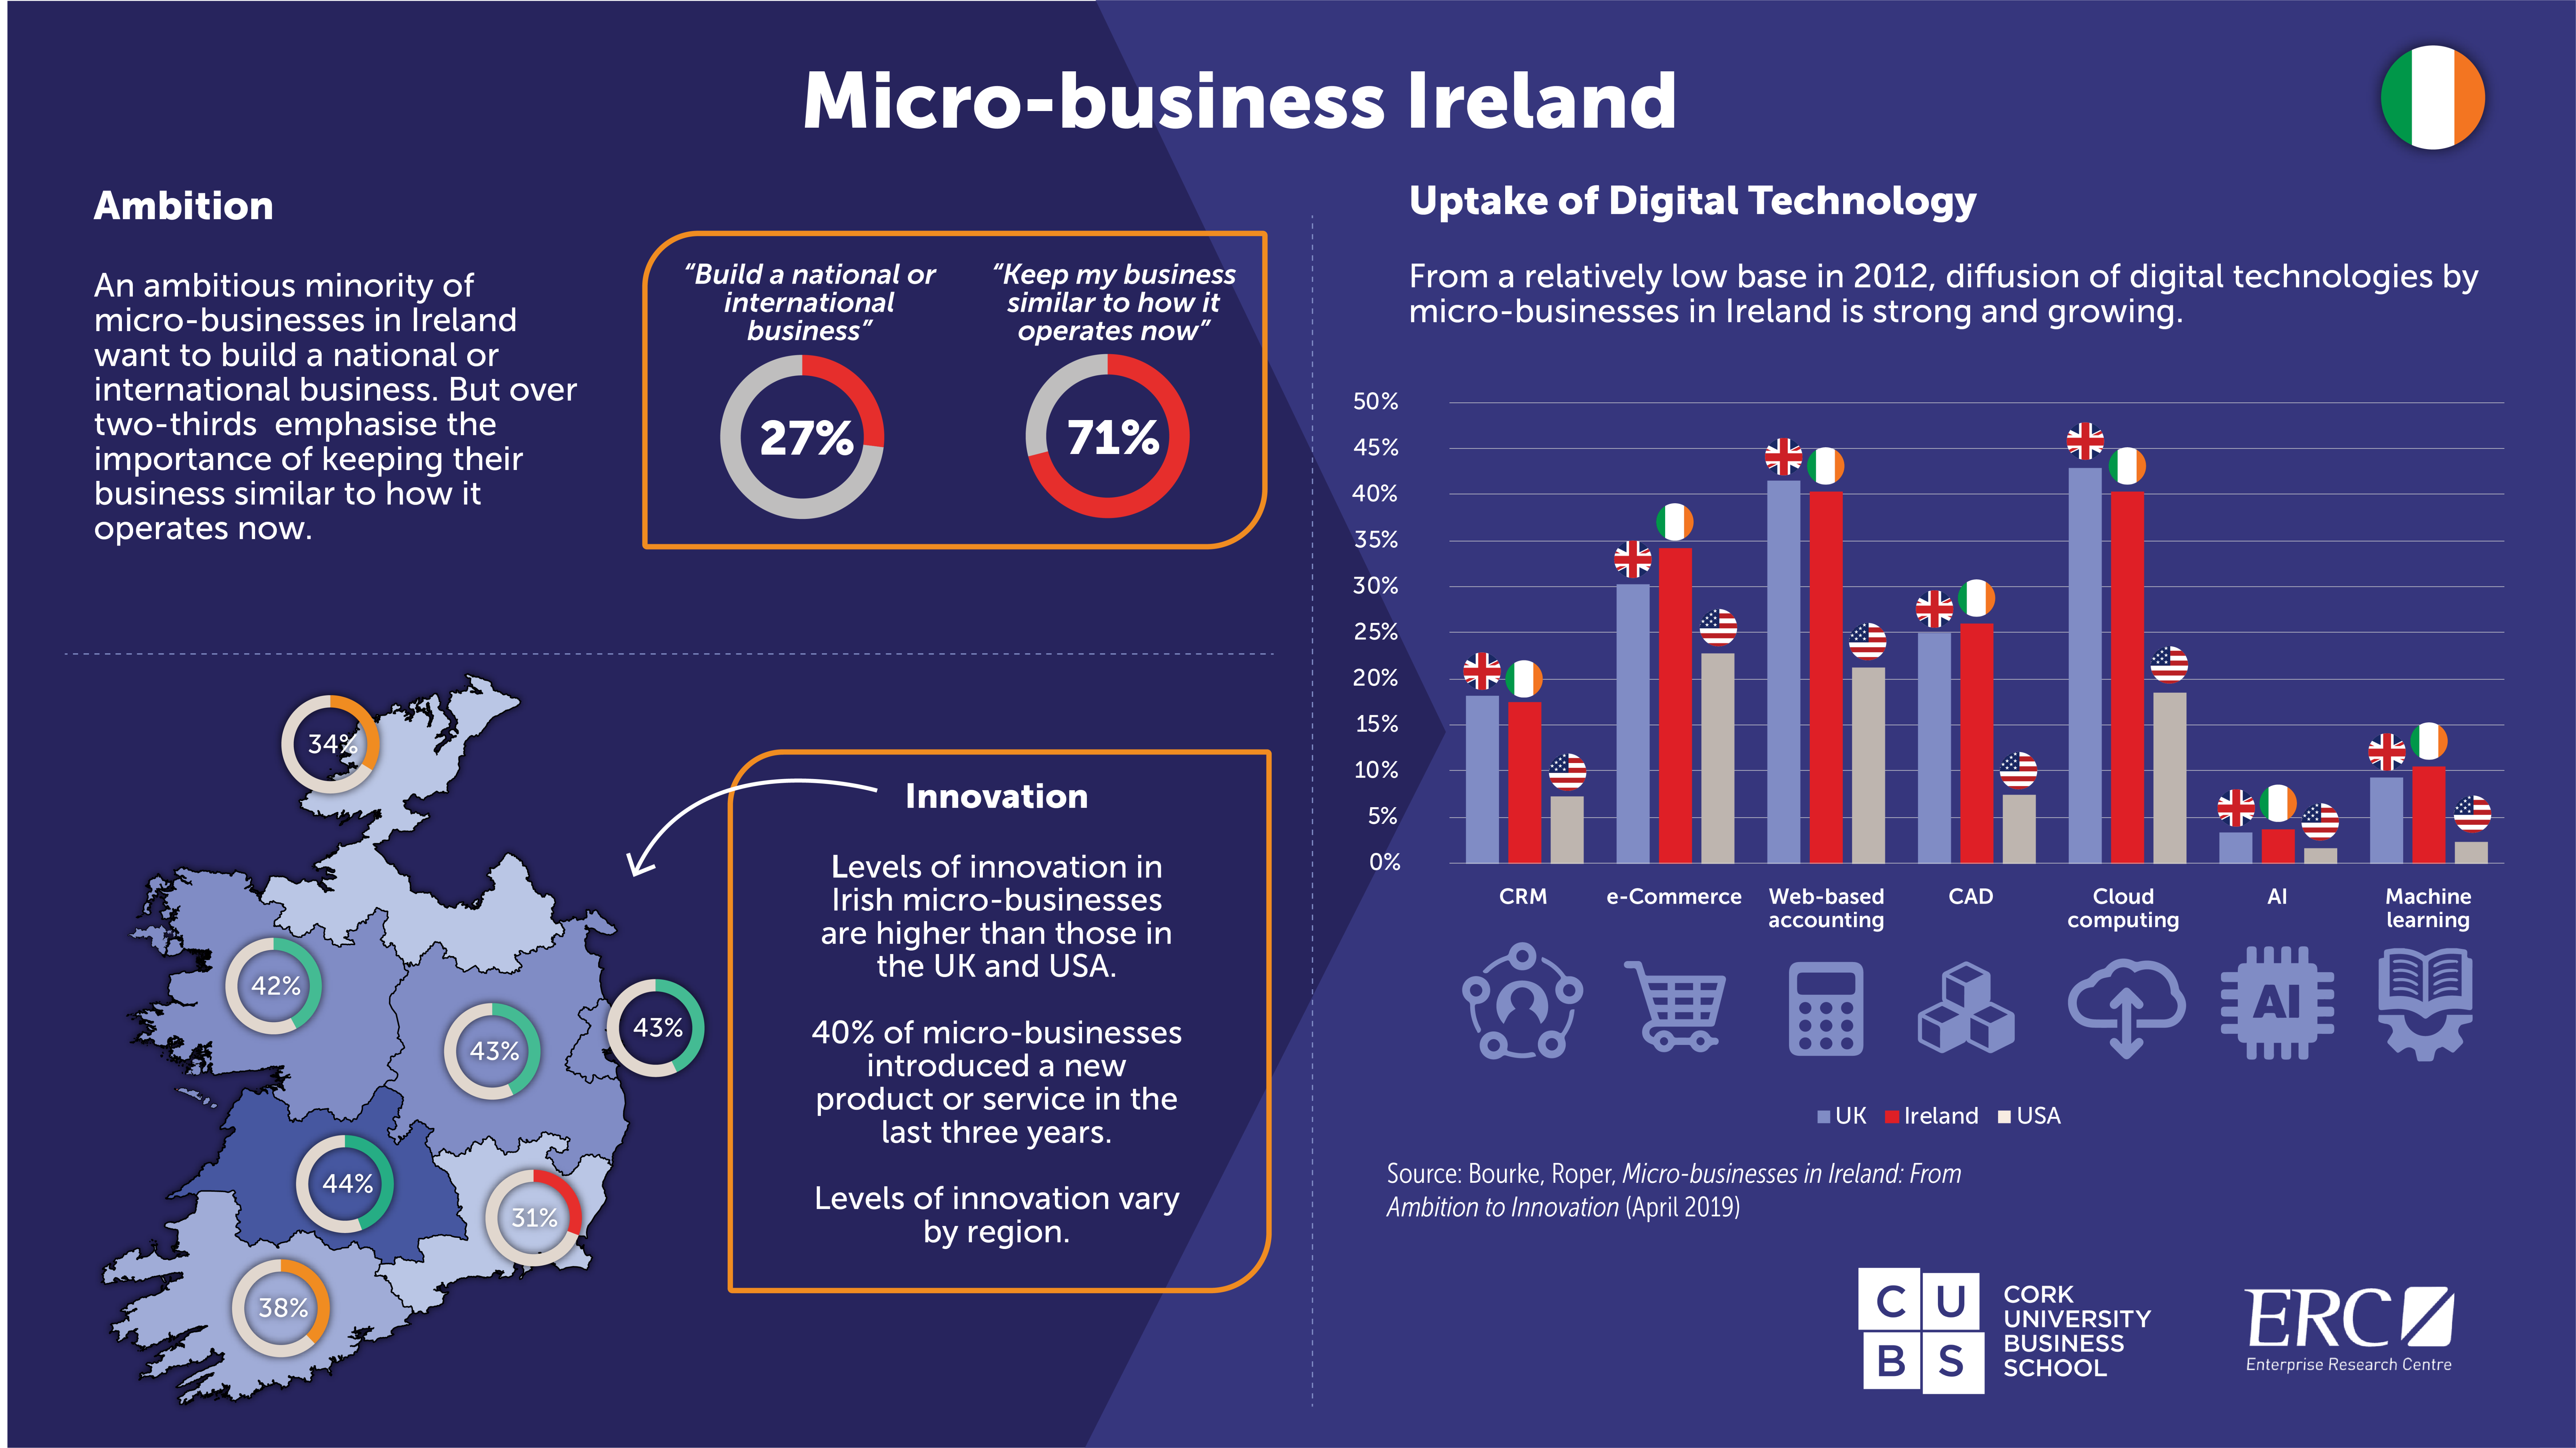 An infographic outlining micro-business information